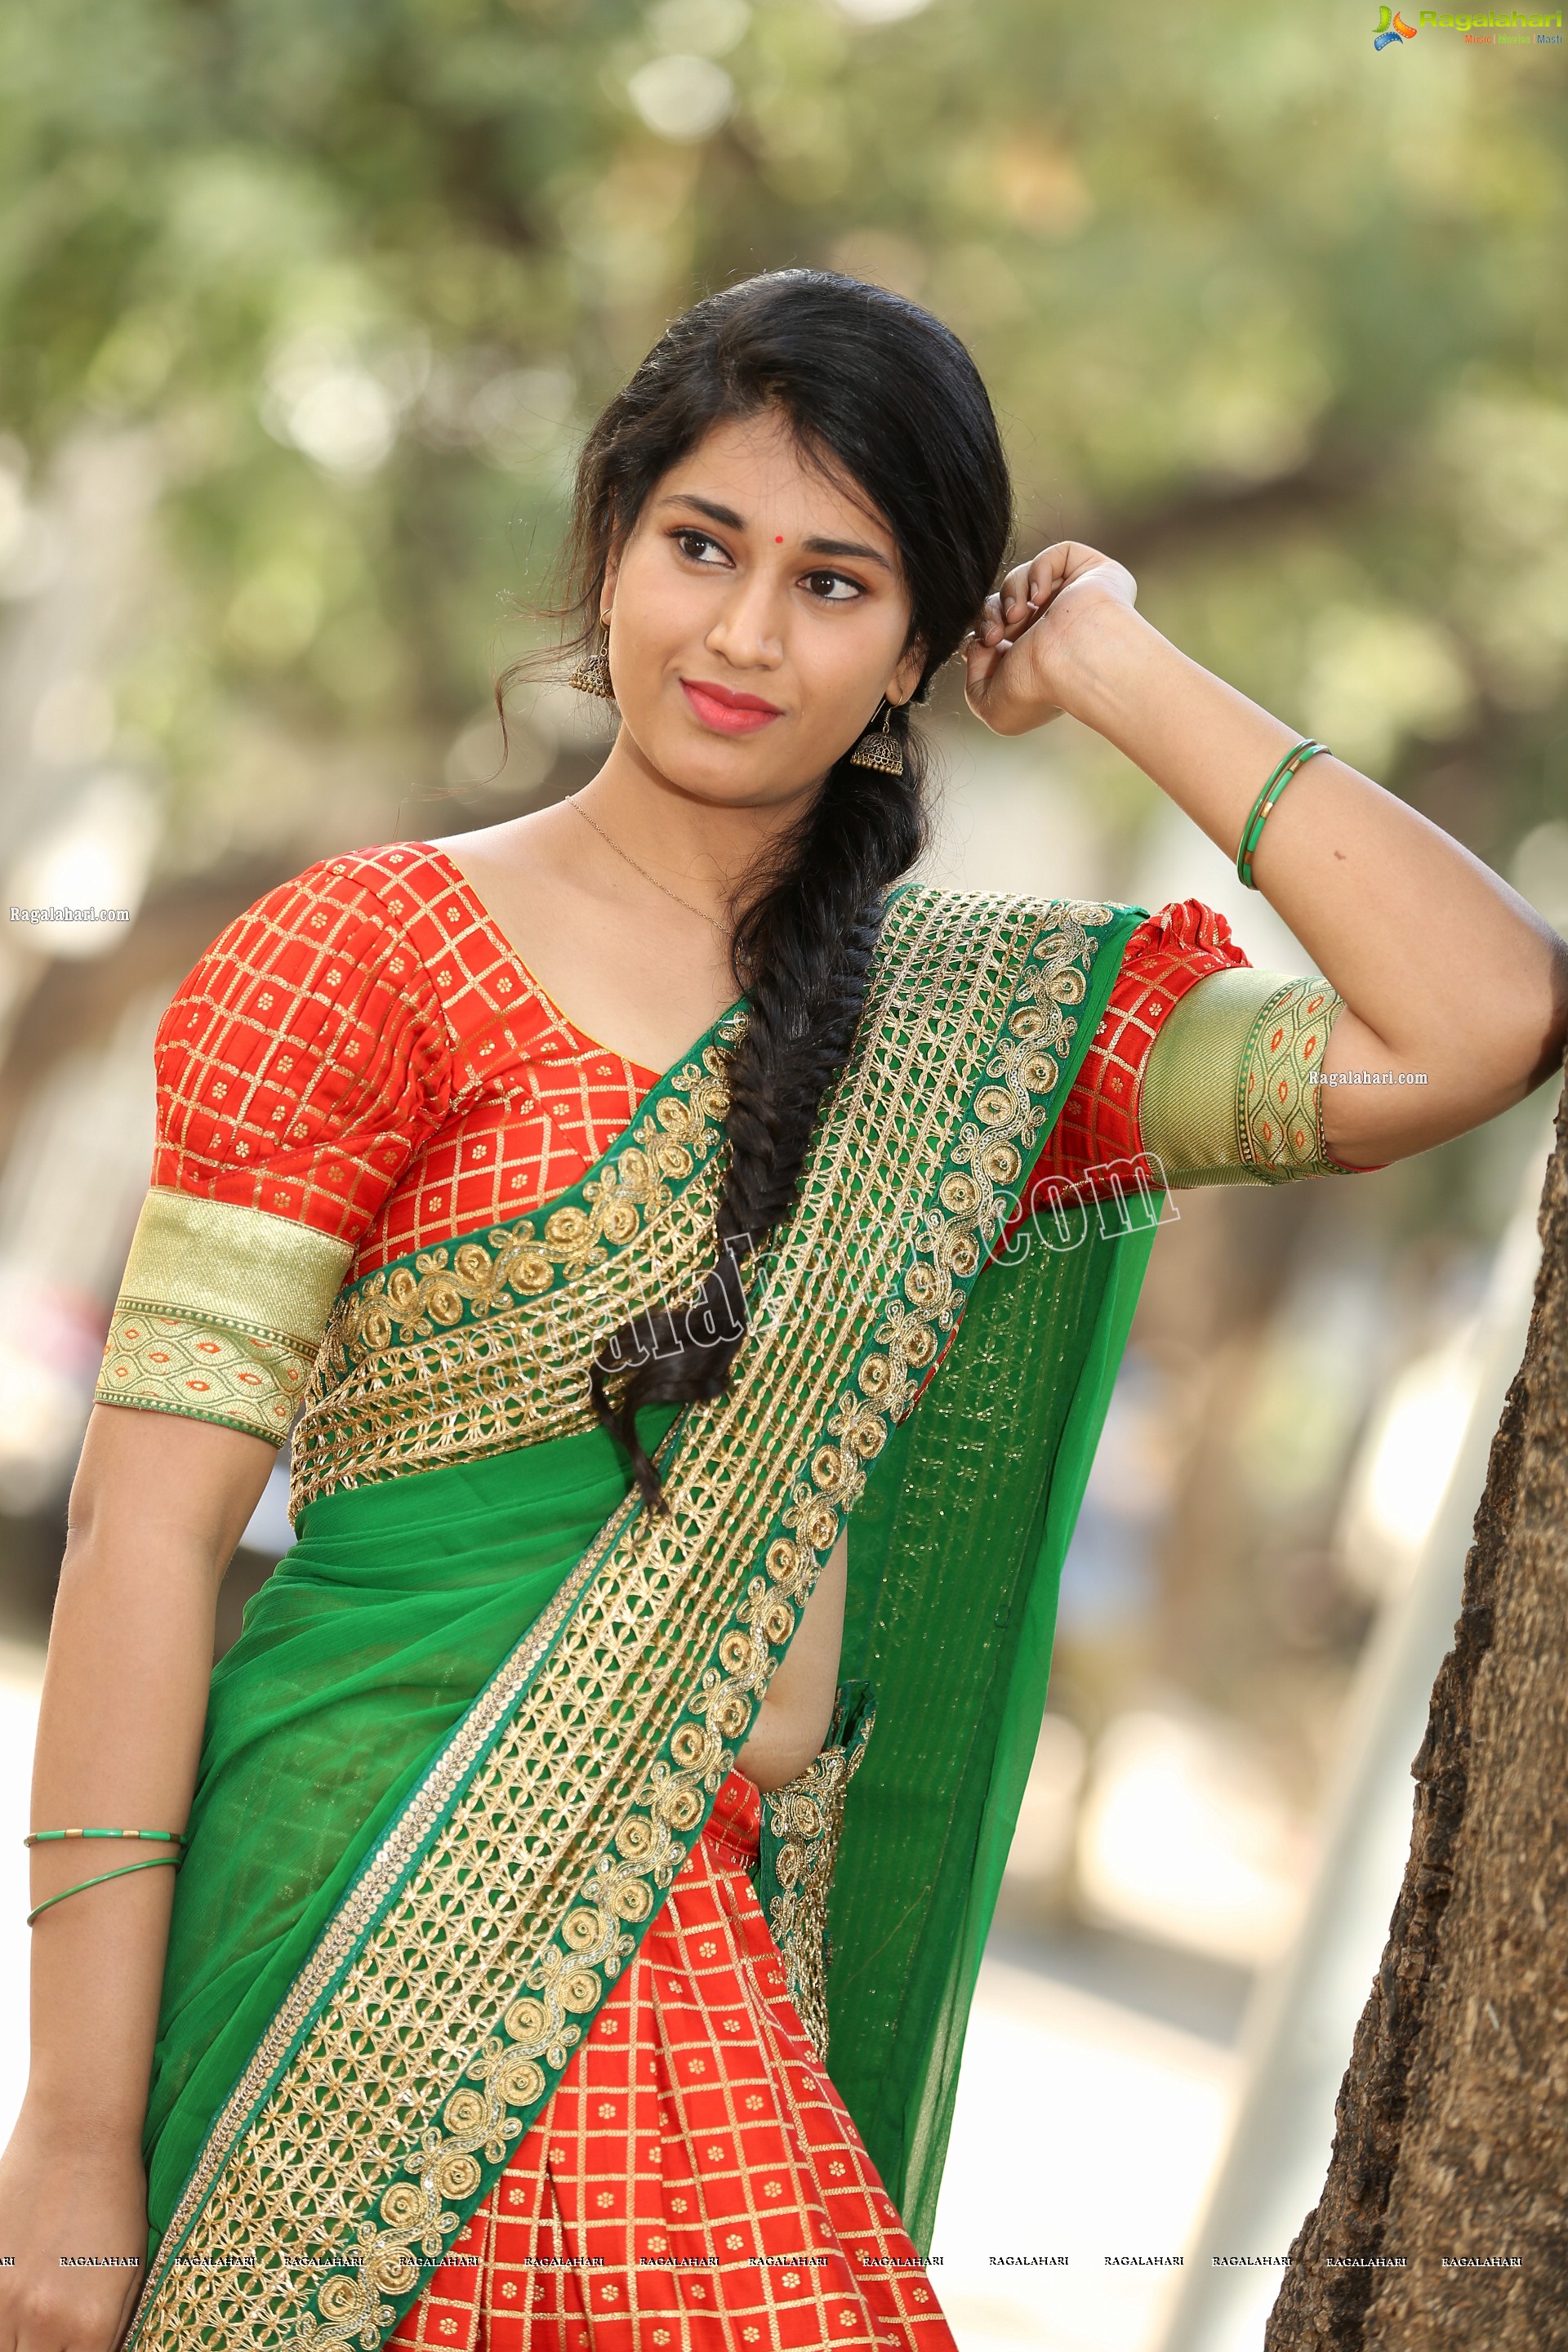 Akhila Ram in Red and Green Classic Combination Half saree, Exclusive Photo Shoot